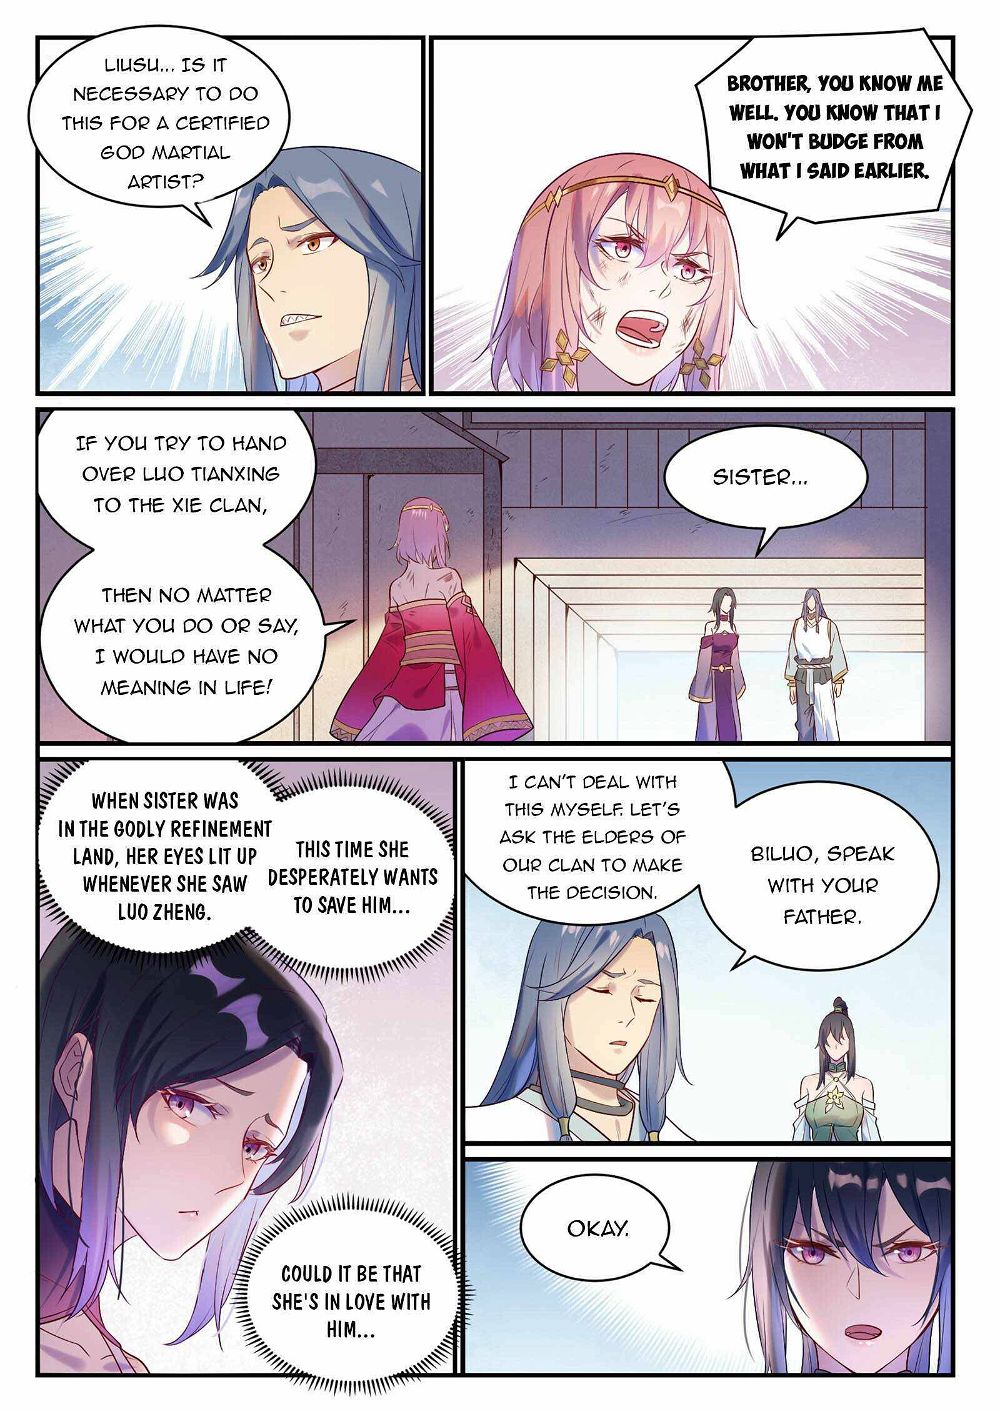 Apotheosis Chapter 887 - Page 3